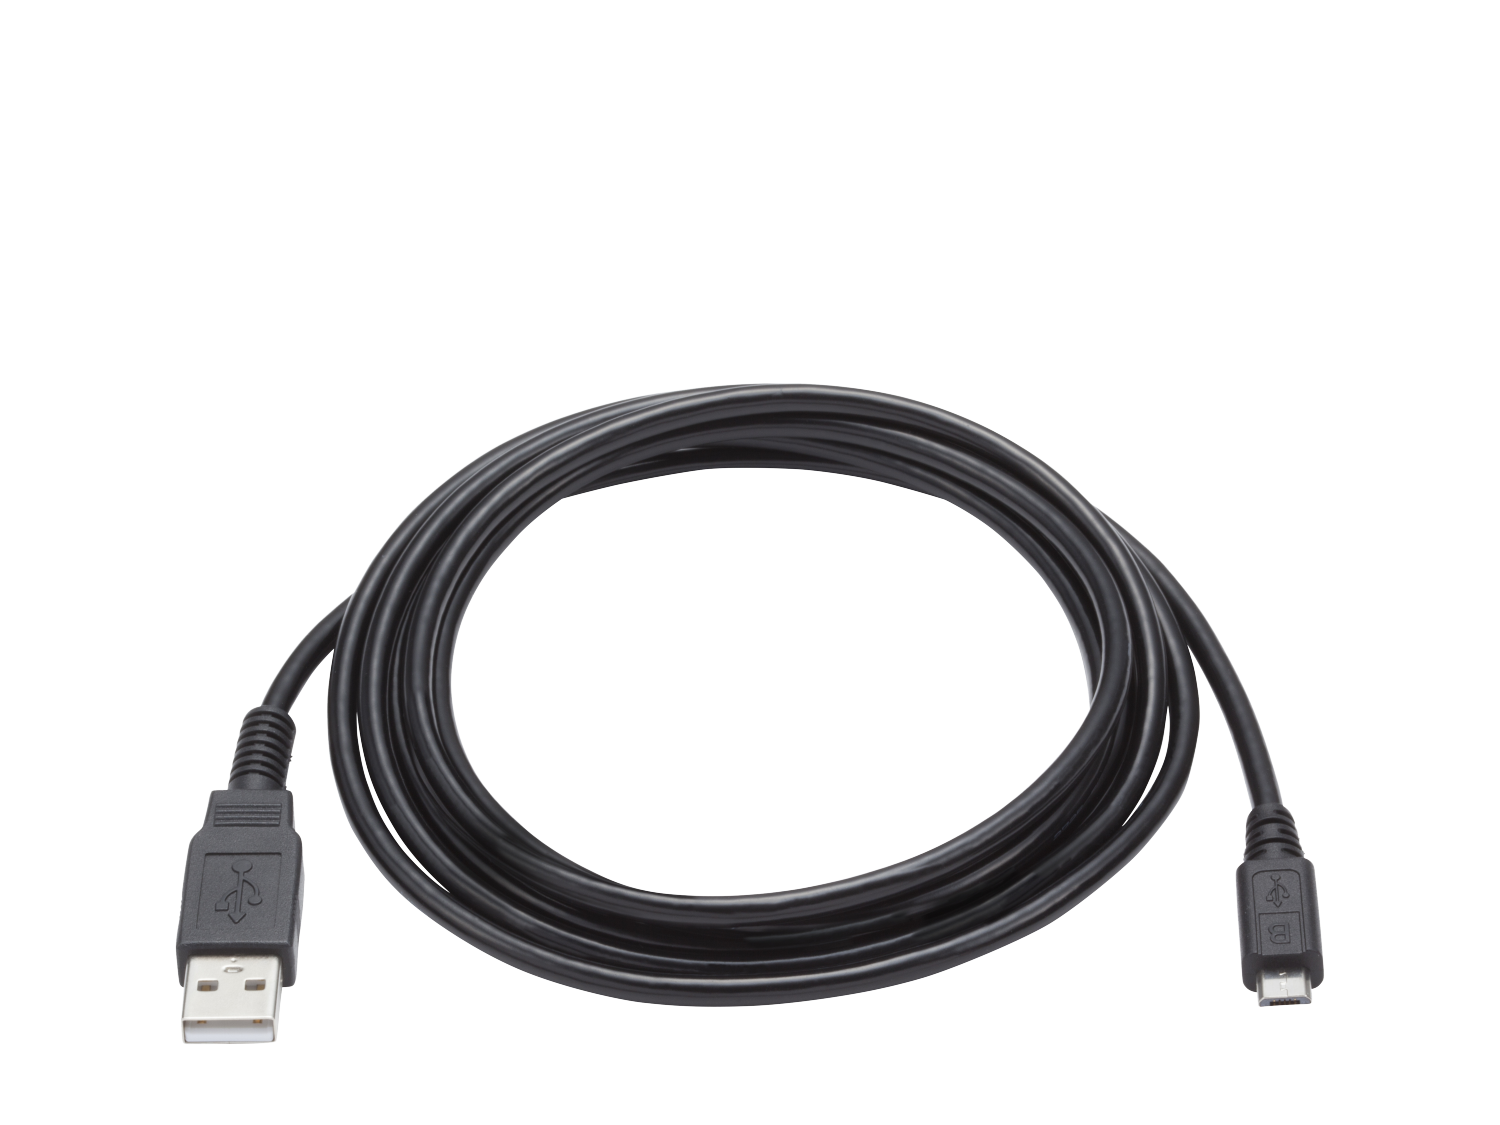 OM System KP30 microUSB Cable